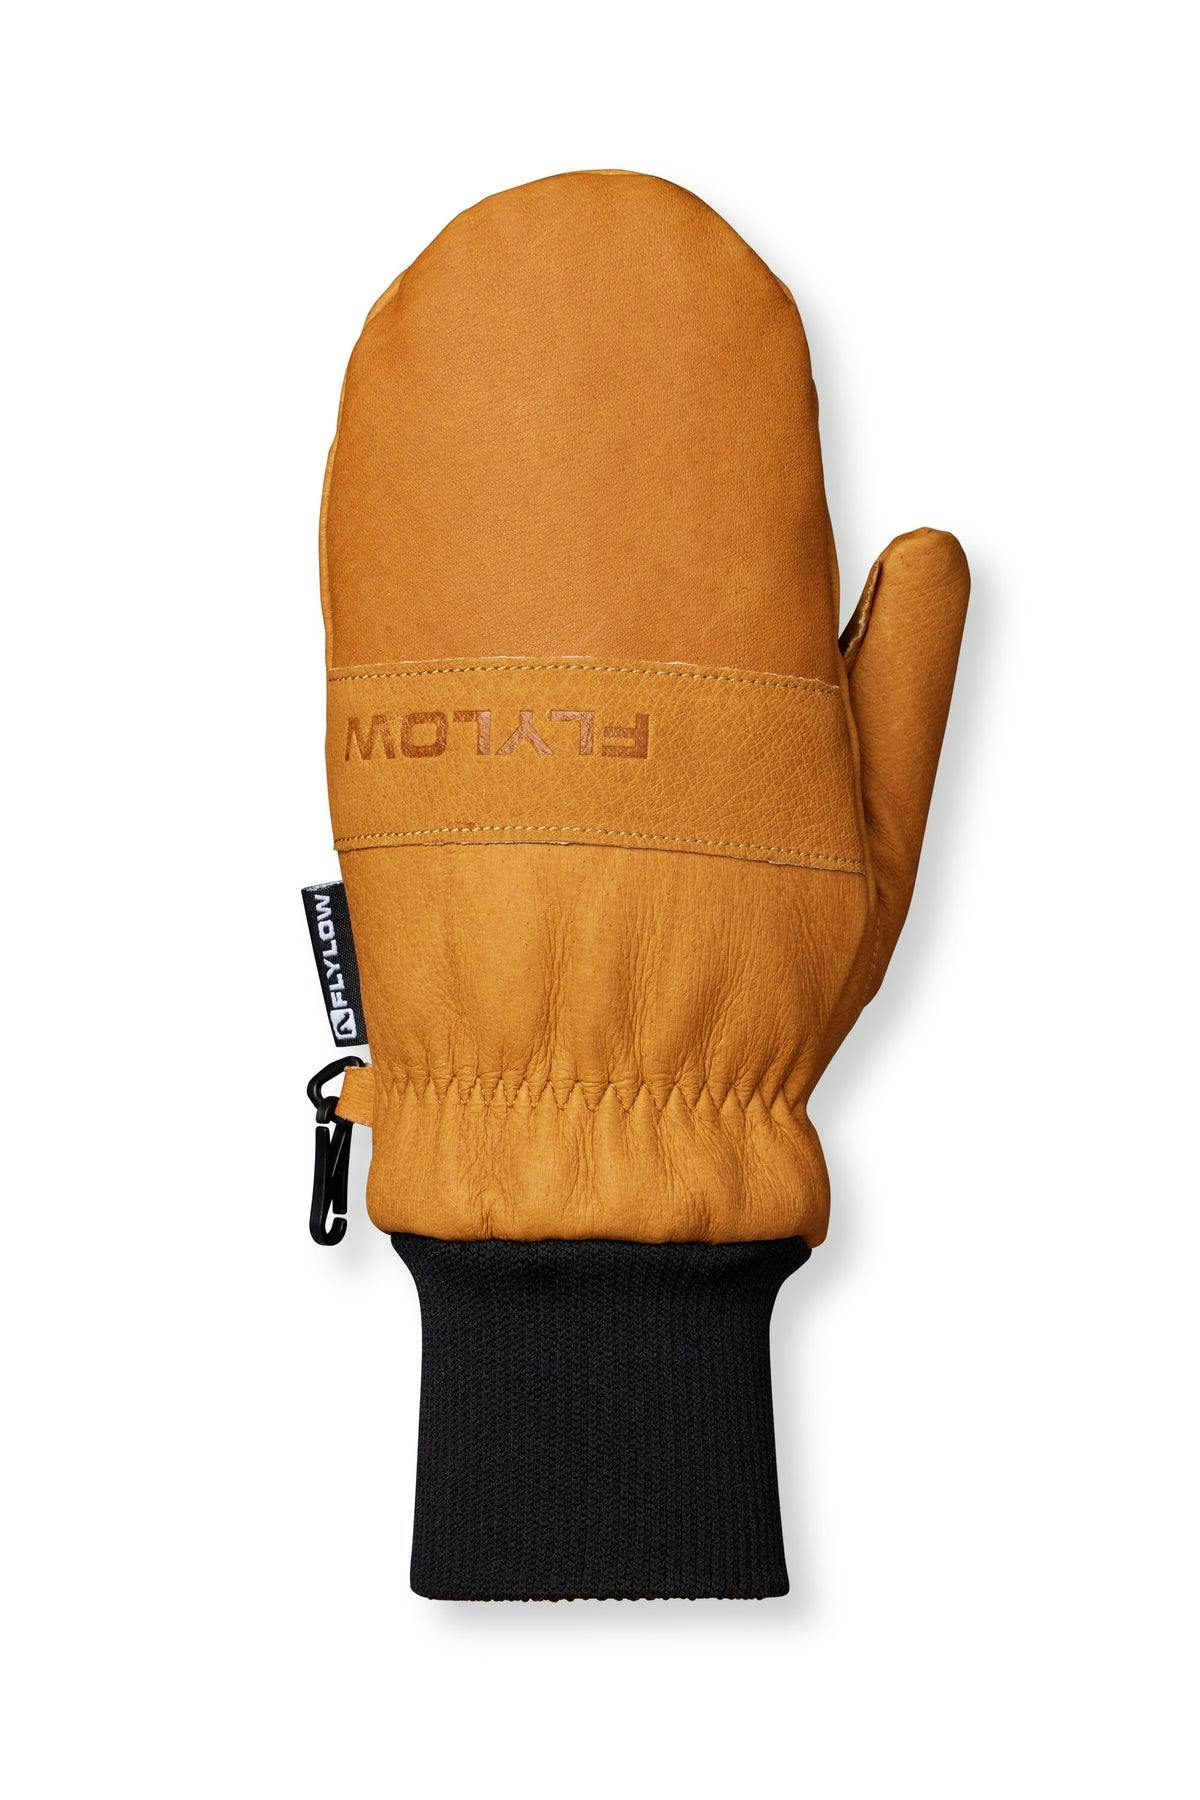 Flylow Oven Mittens